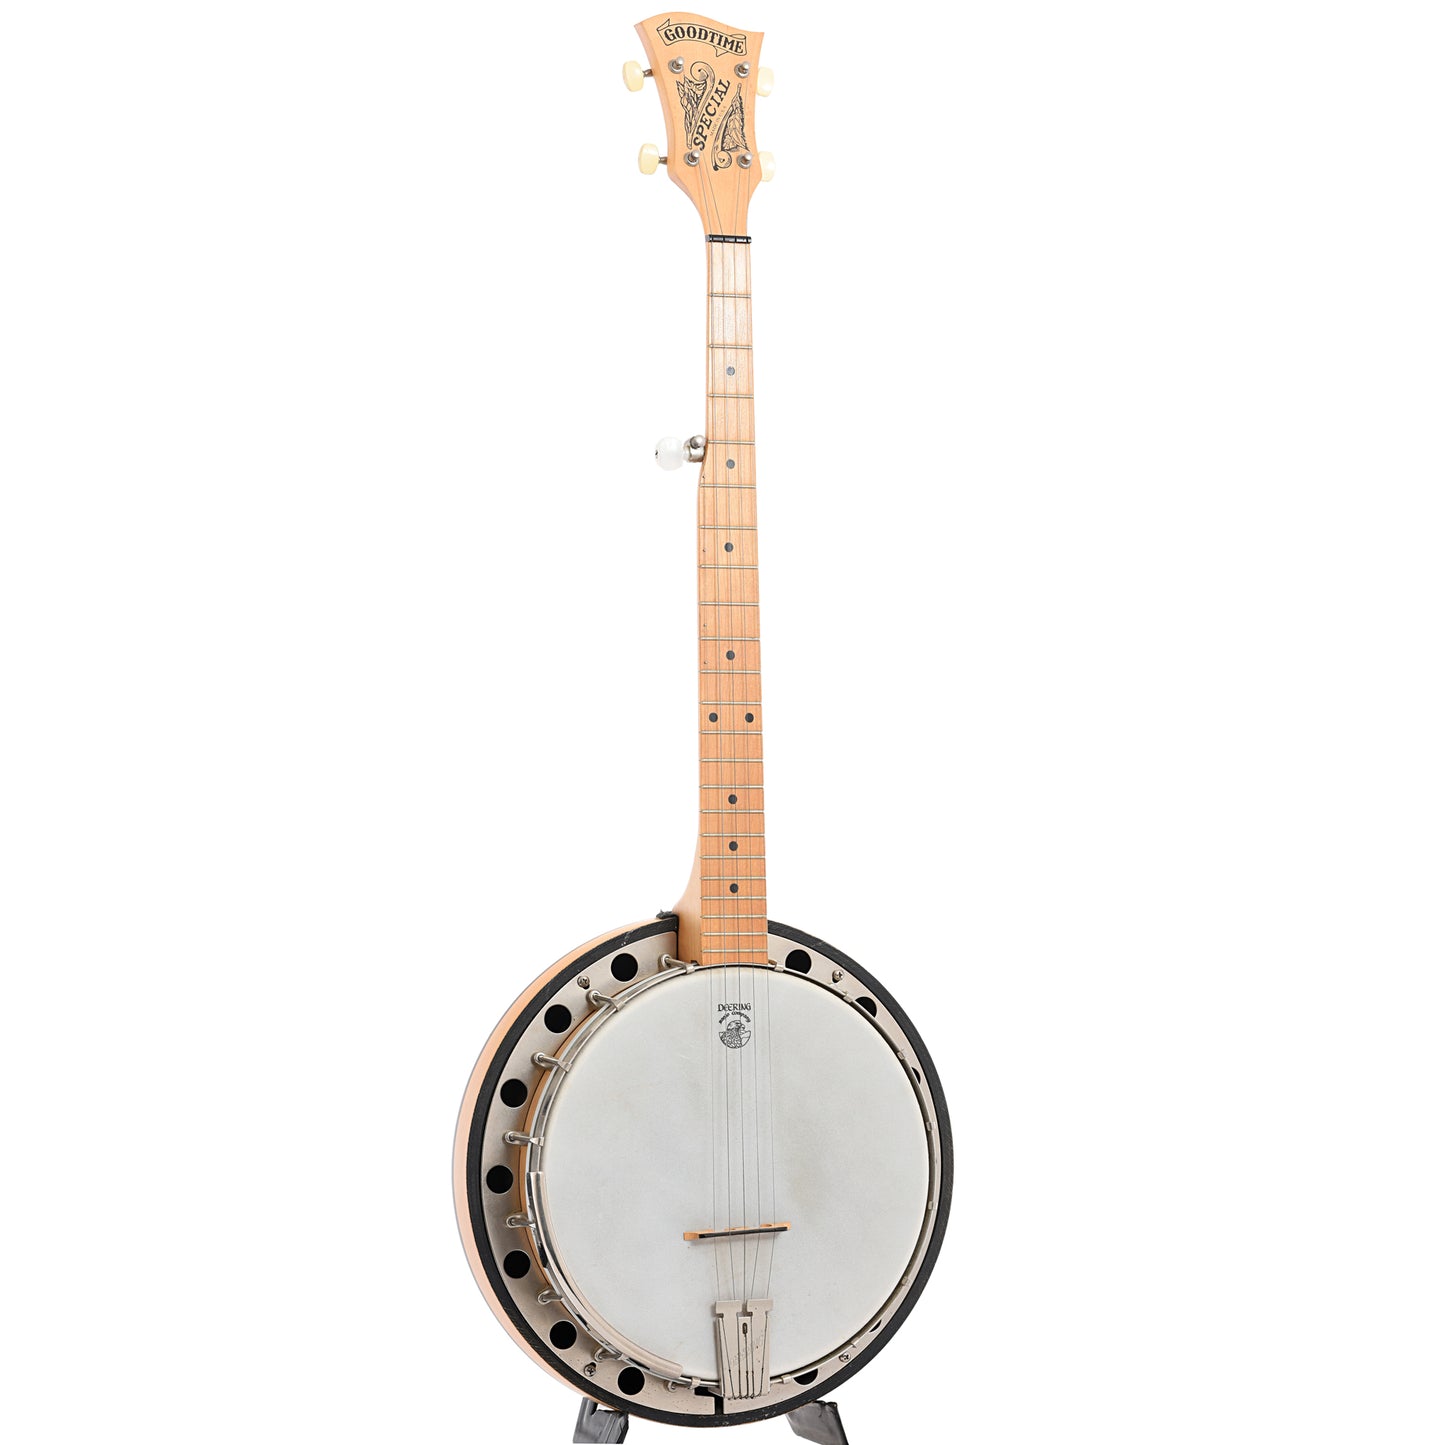 Full front and side of Deering Goodtime II Special Resonator Banjo (c.2003)